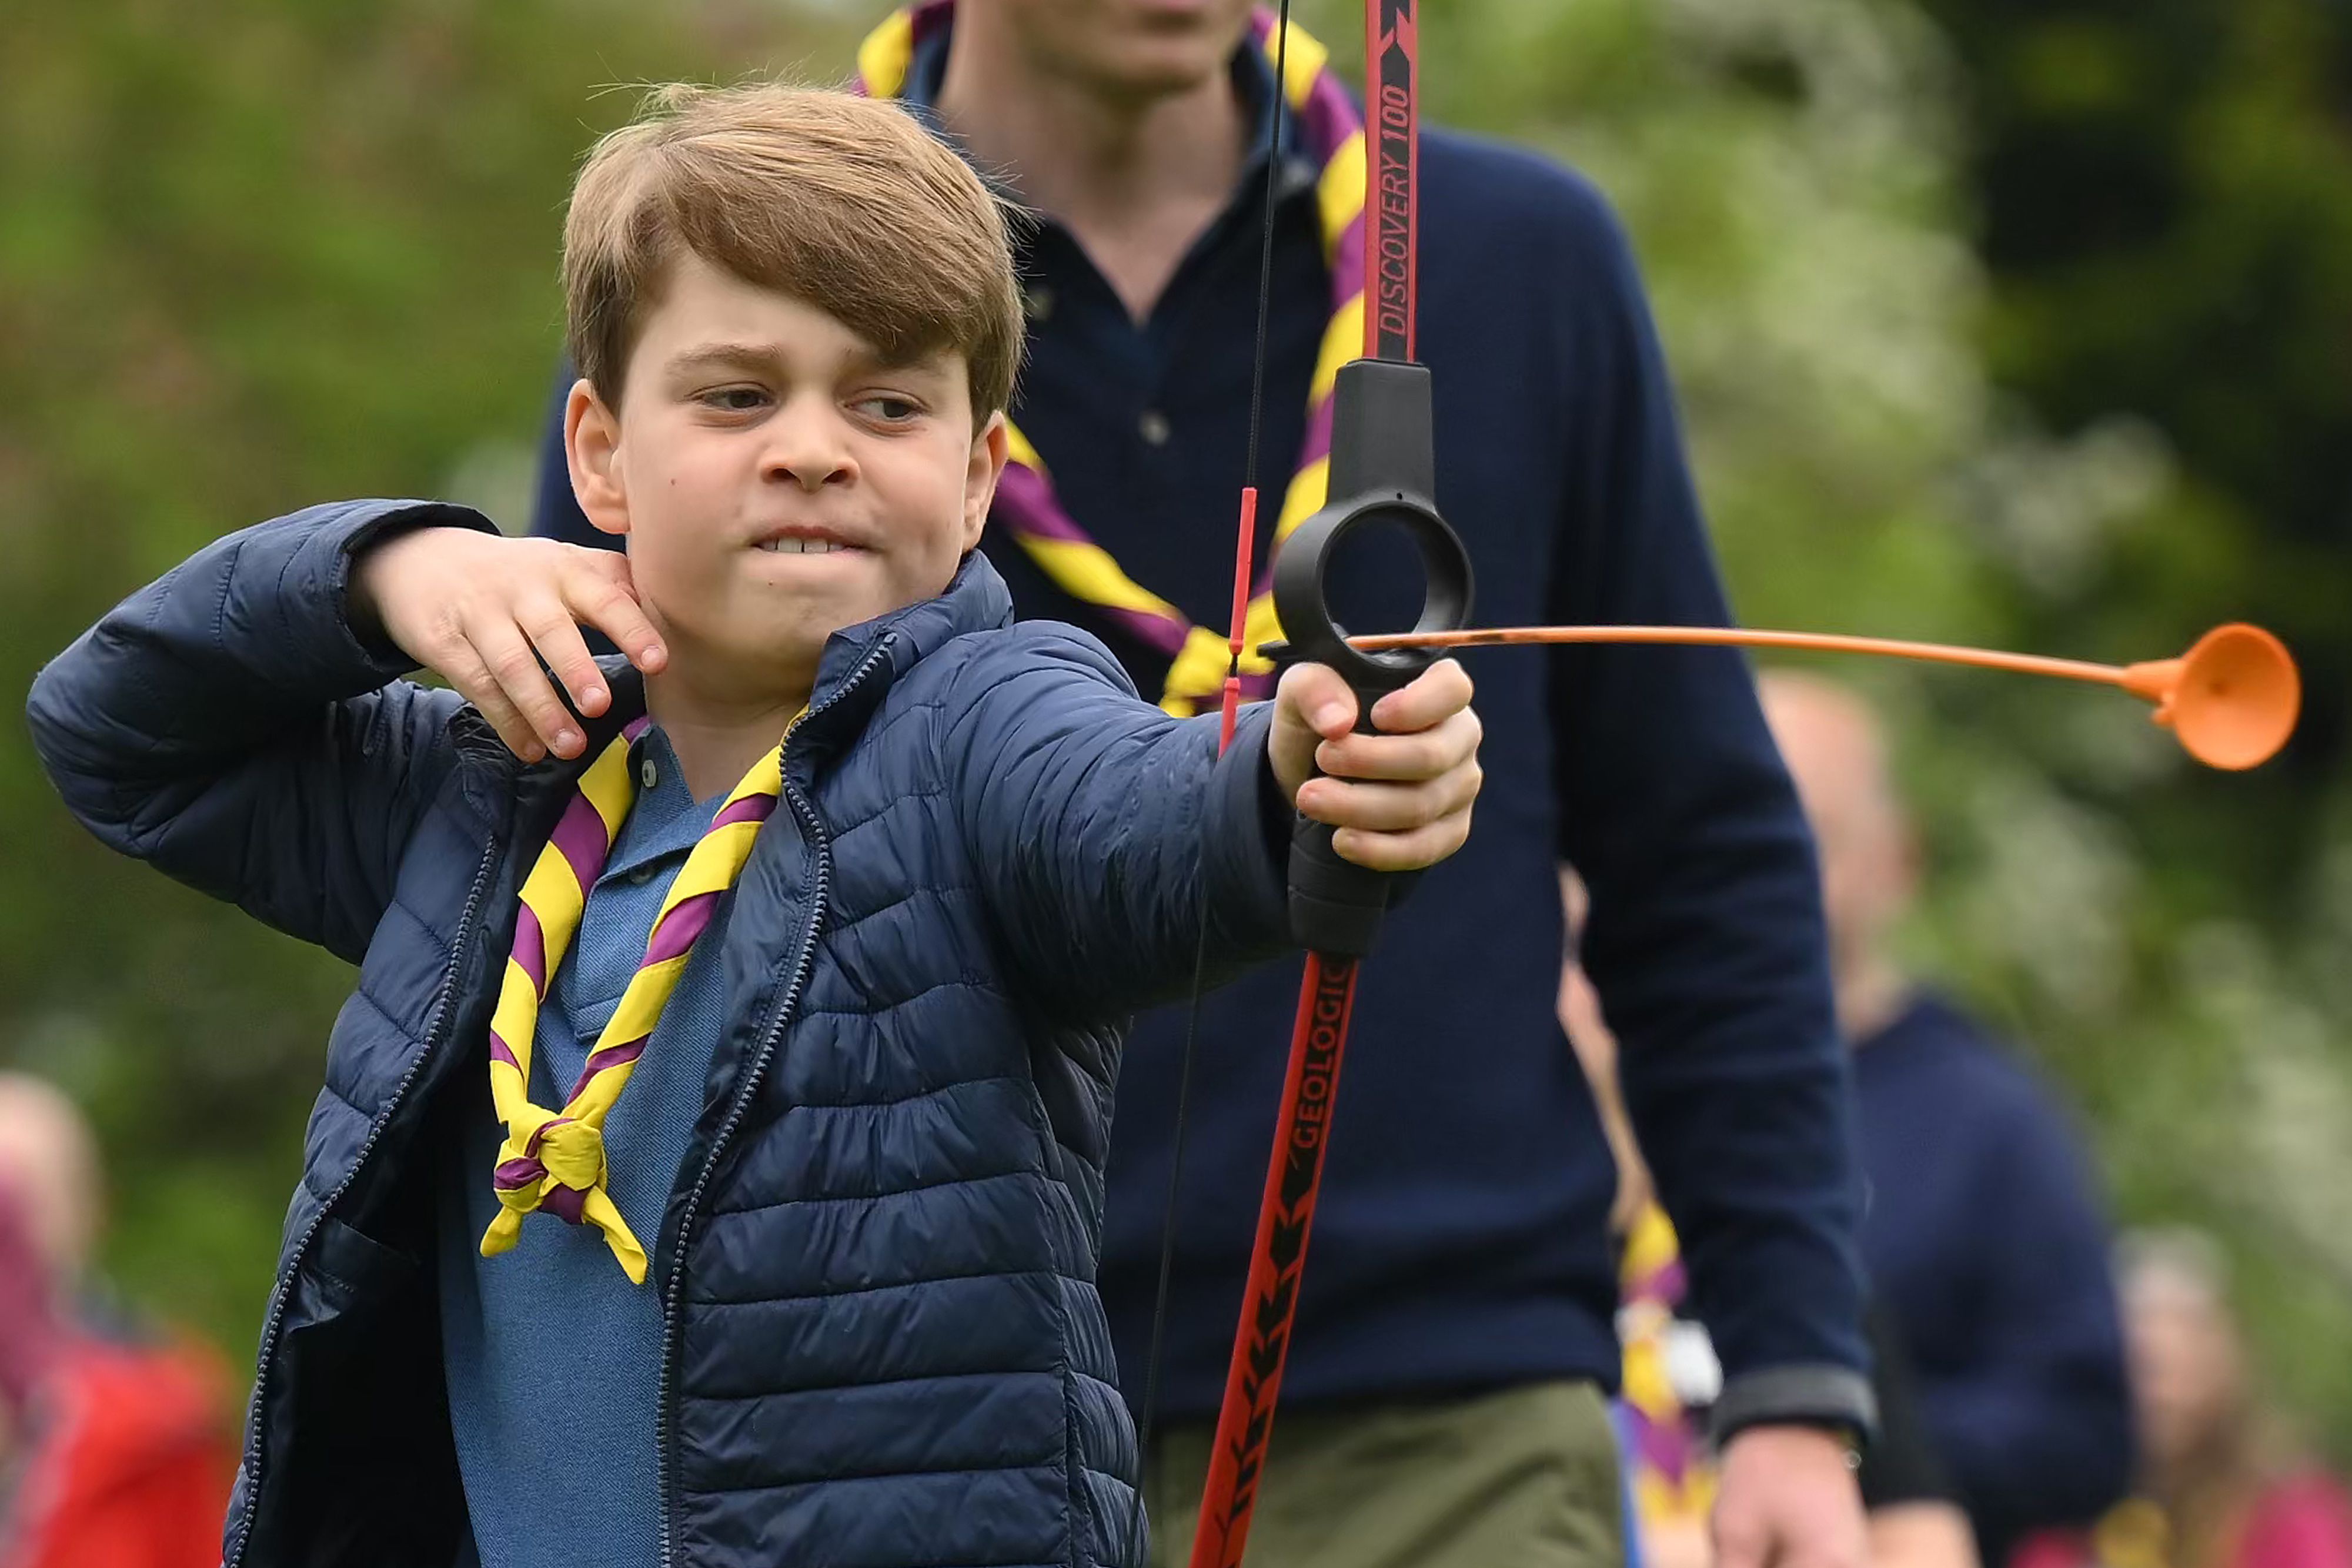 <p>Prince George tried his hand at archery while taking part in the Big Help Out volunteering drive -- the final event of grandfather King Charles III's <a href="https://www.wonderwall.com/celebrity/the-coronation-of-king-charles-iii-and-queen-camilla-the-best-pictures-of-all-the-royals-at-this-historic-event-735015.gallery">coronation</a> festivities -- during a visit to the 3rd Upton Scouts Hut in Slough, England, on May 8, 2023, where he and his siblings and parents helped to renovate and improve the building during their visit.</p>